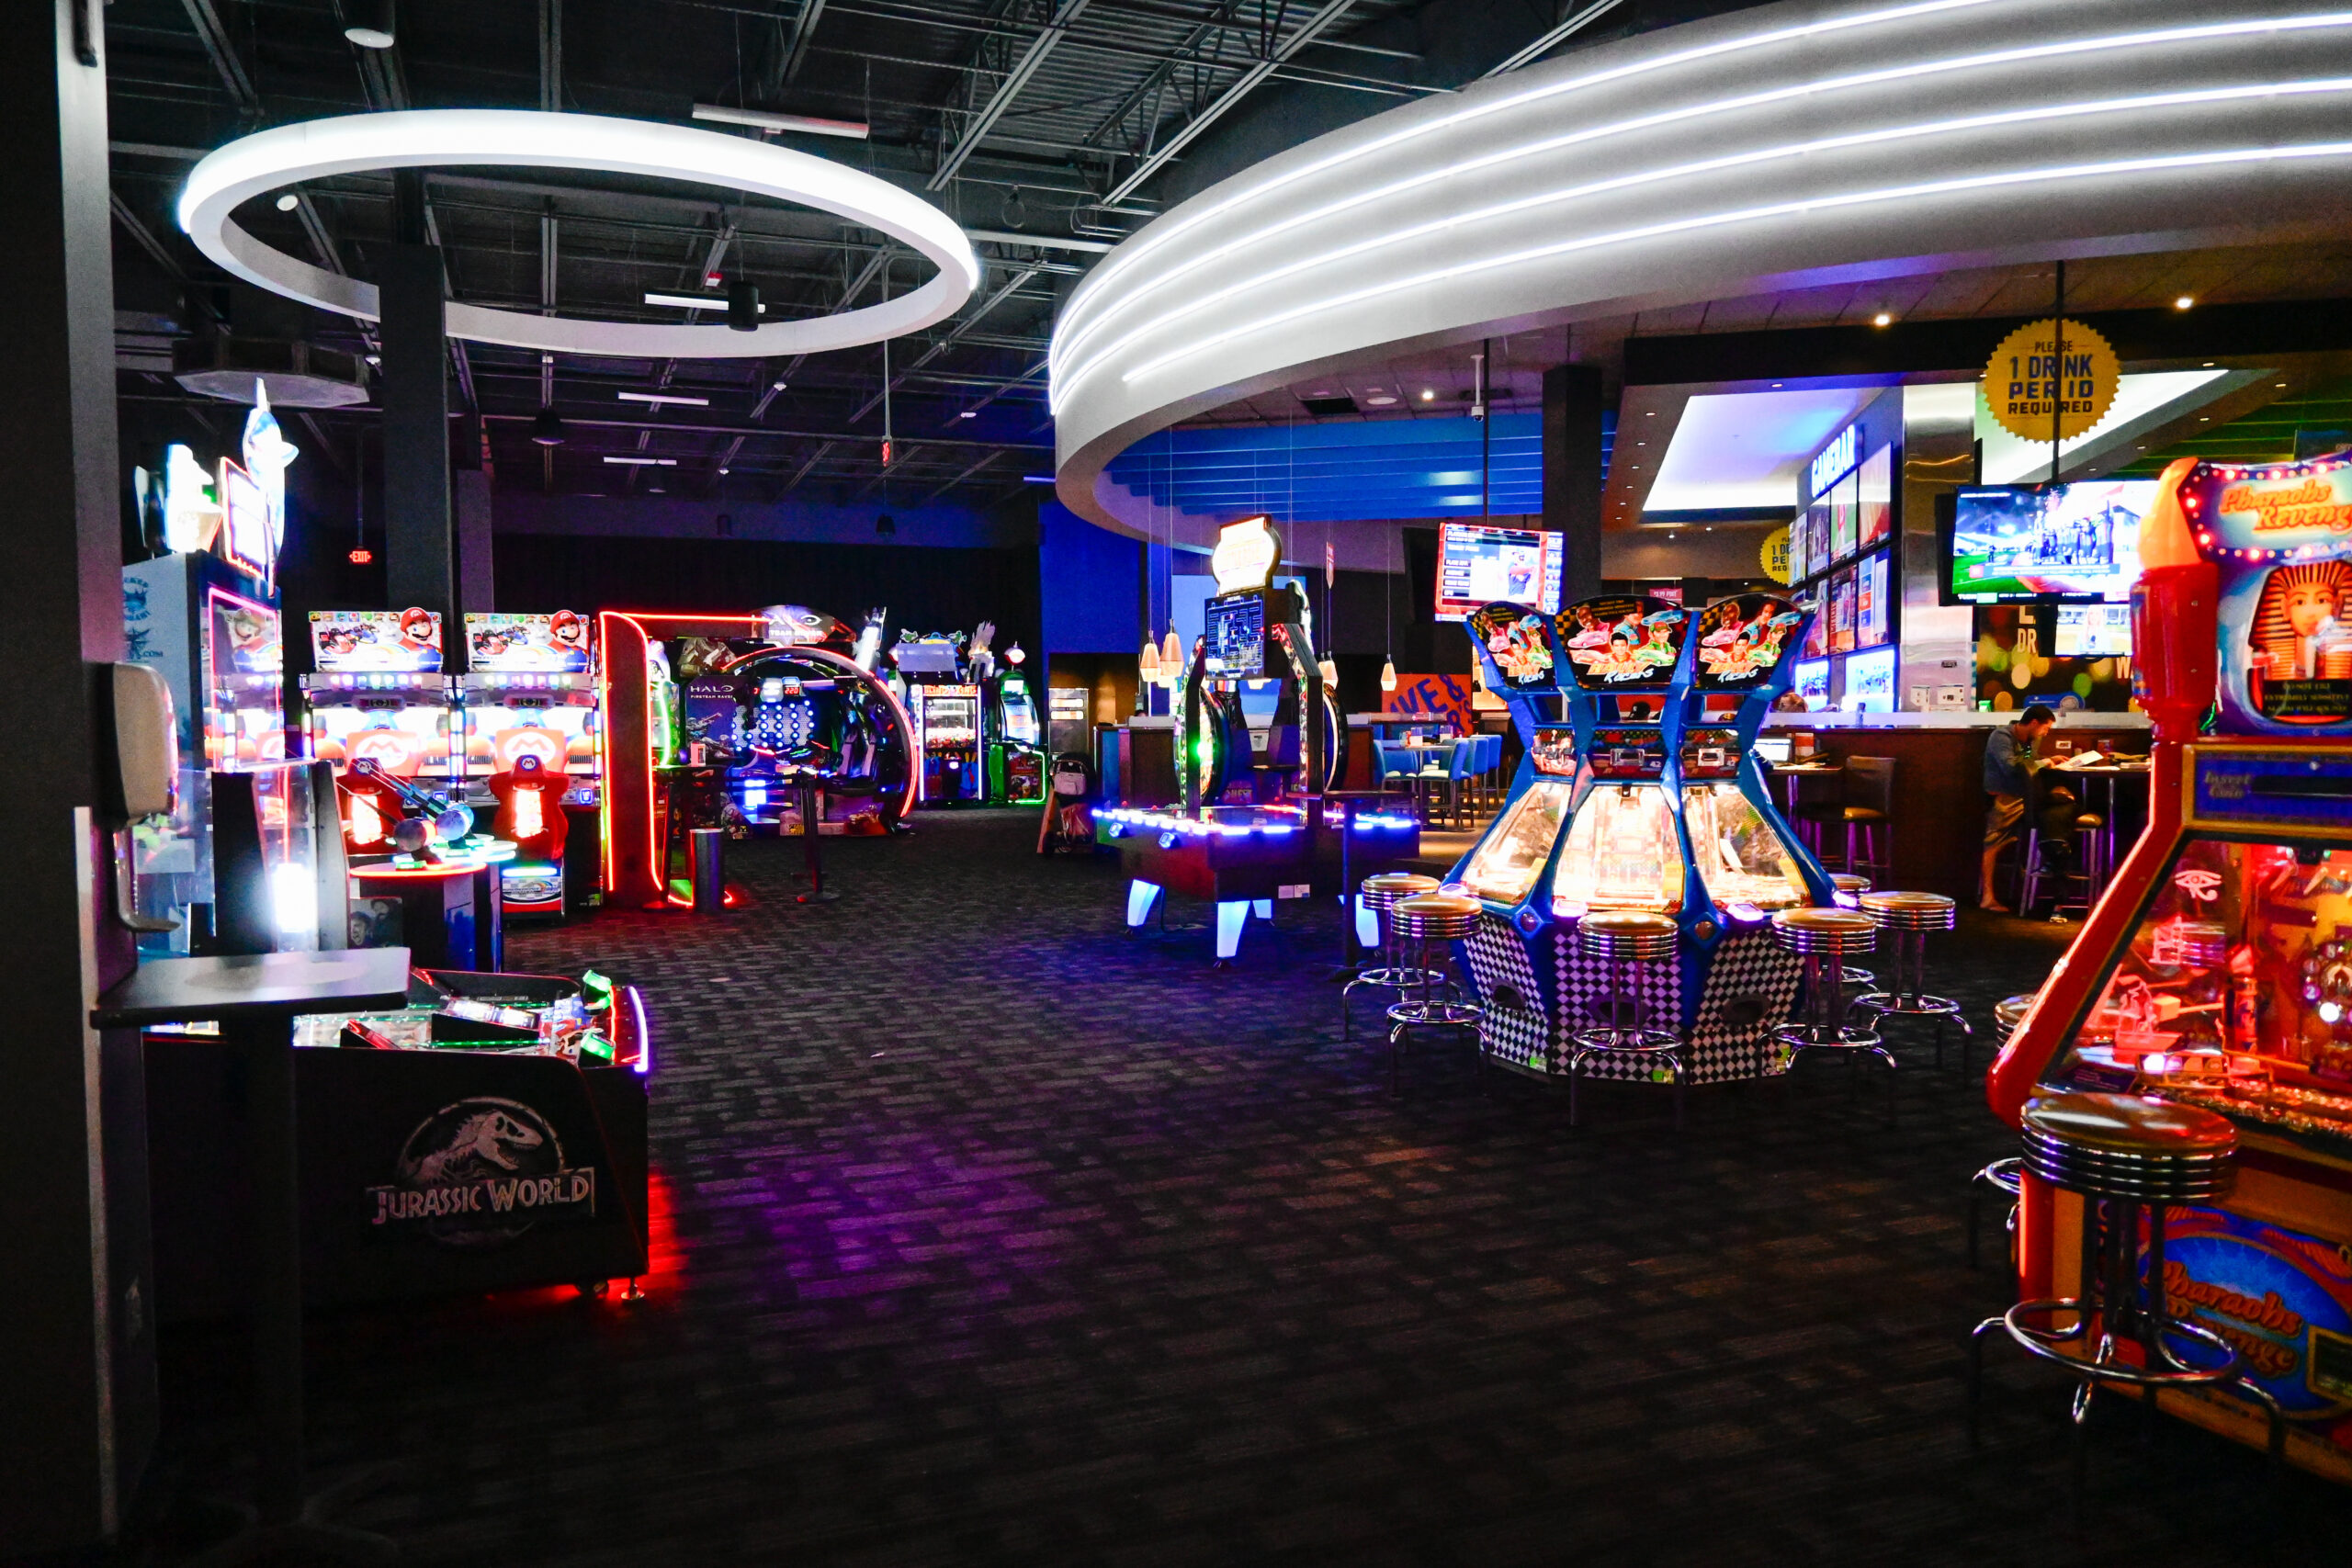 Dave & Buster’s Myrtle Beach